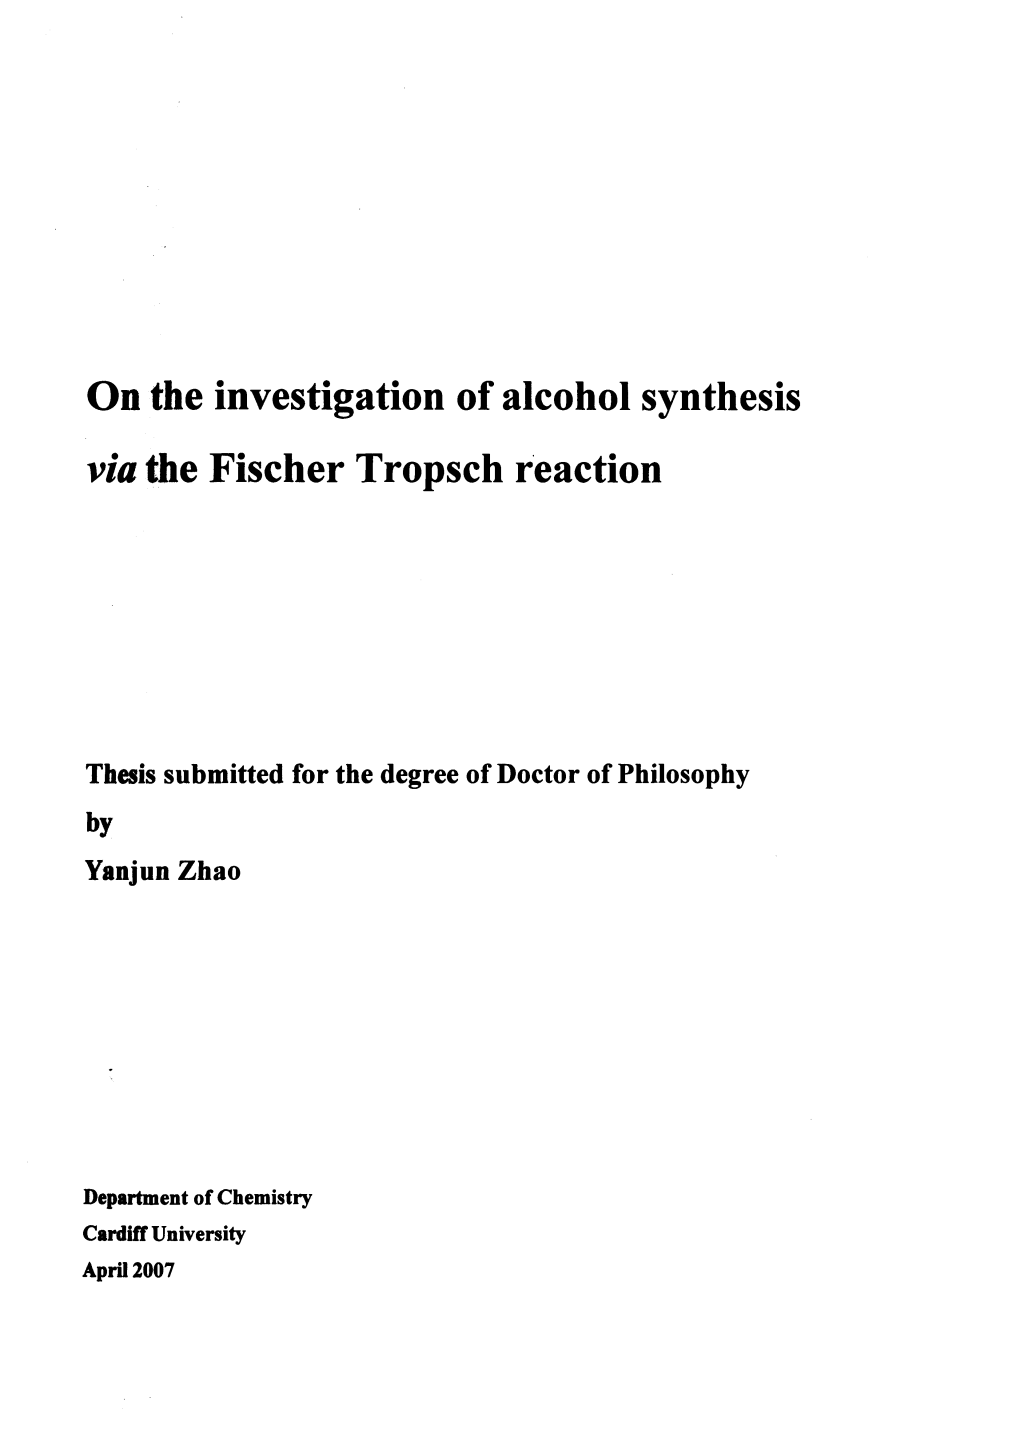 On the Investigation of Alcohol Synthesis Viathe Fischer Tropsch